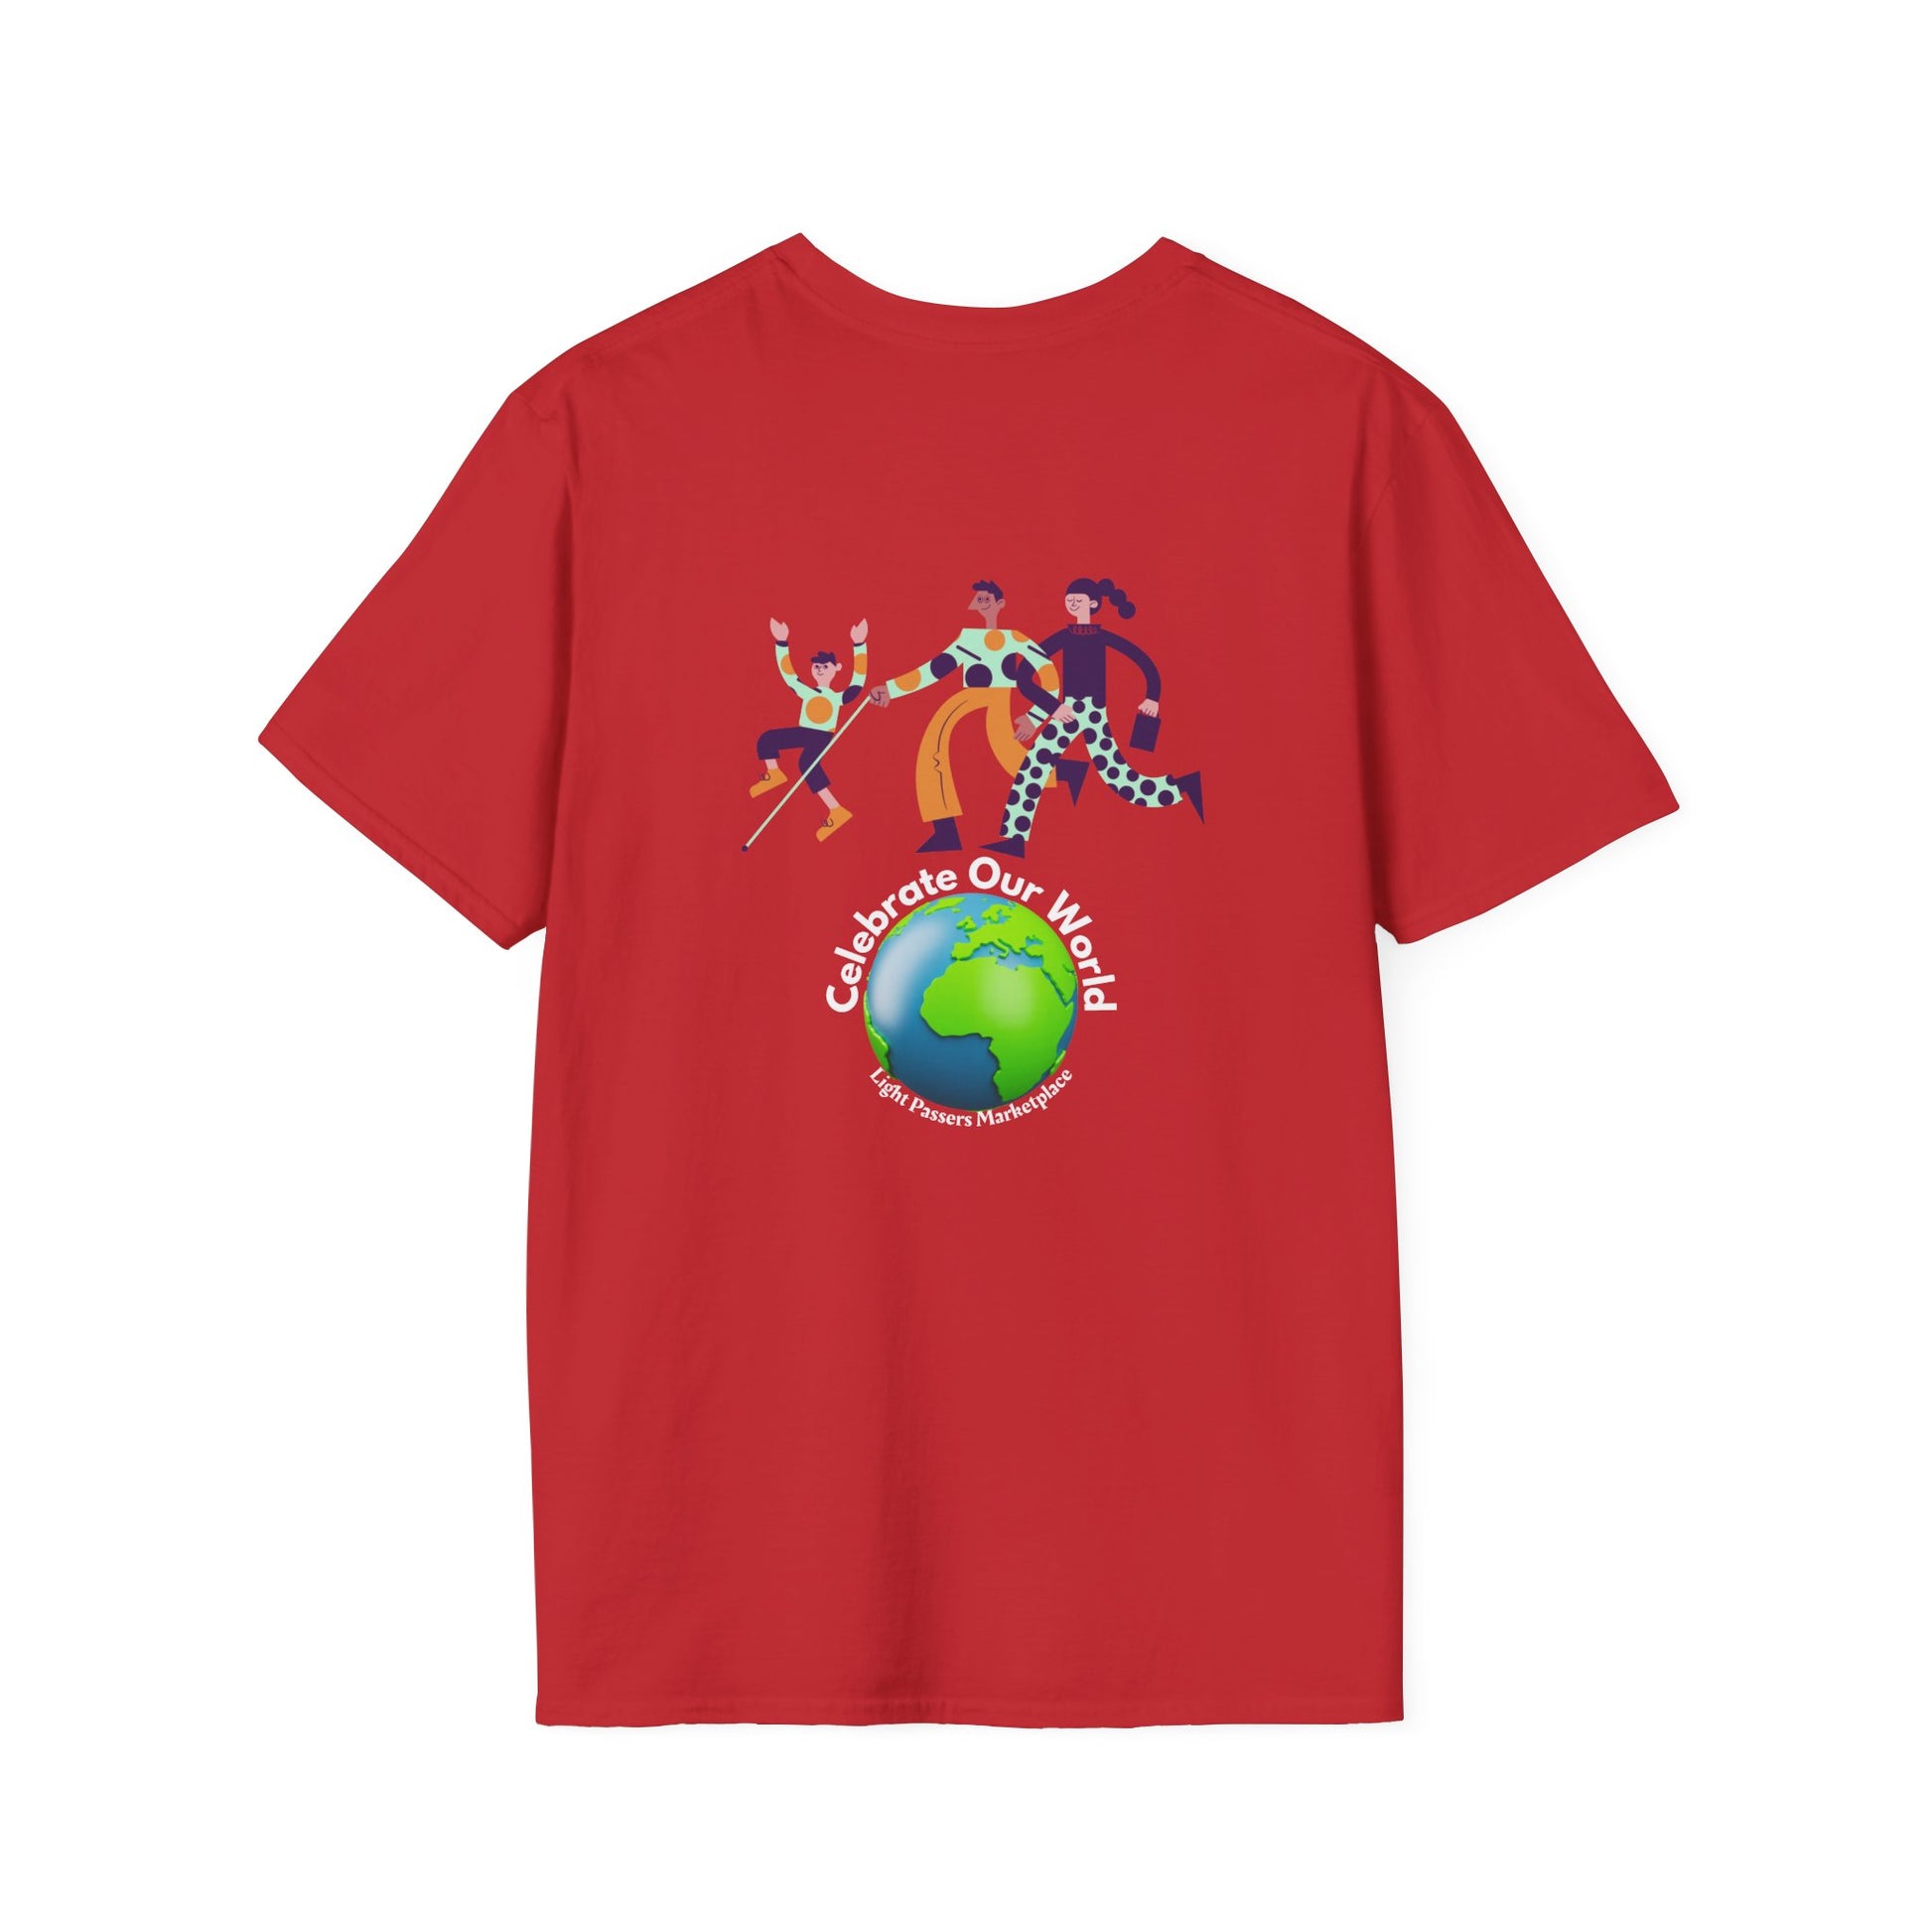 Unisex red t-shirt featuring a clown graphic. 100% ring-spun cotton, lightweight (4.5 oz/yd²), ribbed crew neckline, tear-away label, ethically sourced US cotton. No side seams, twill tape shoulders for durability.